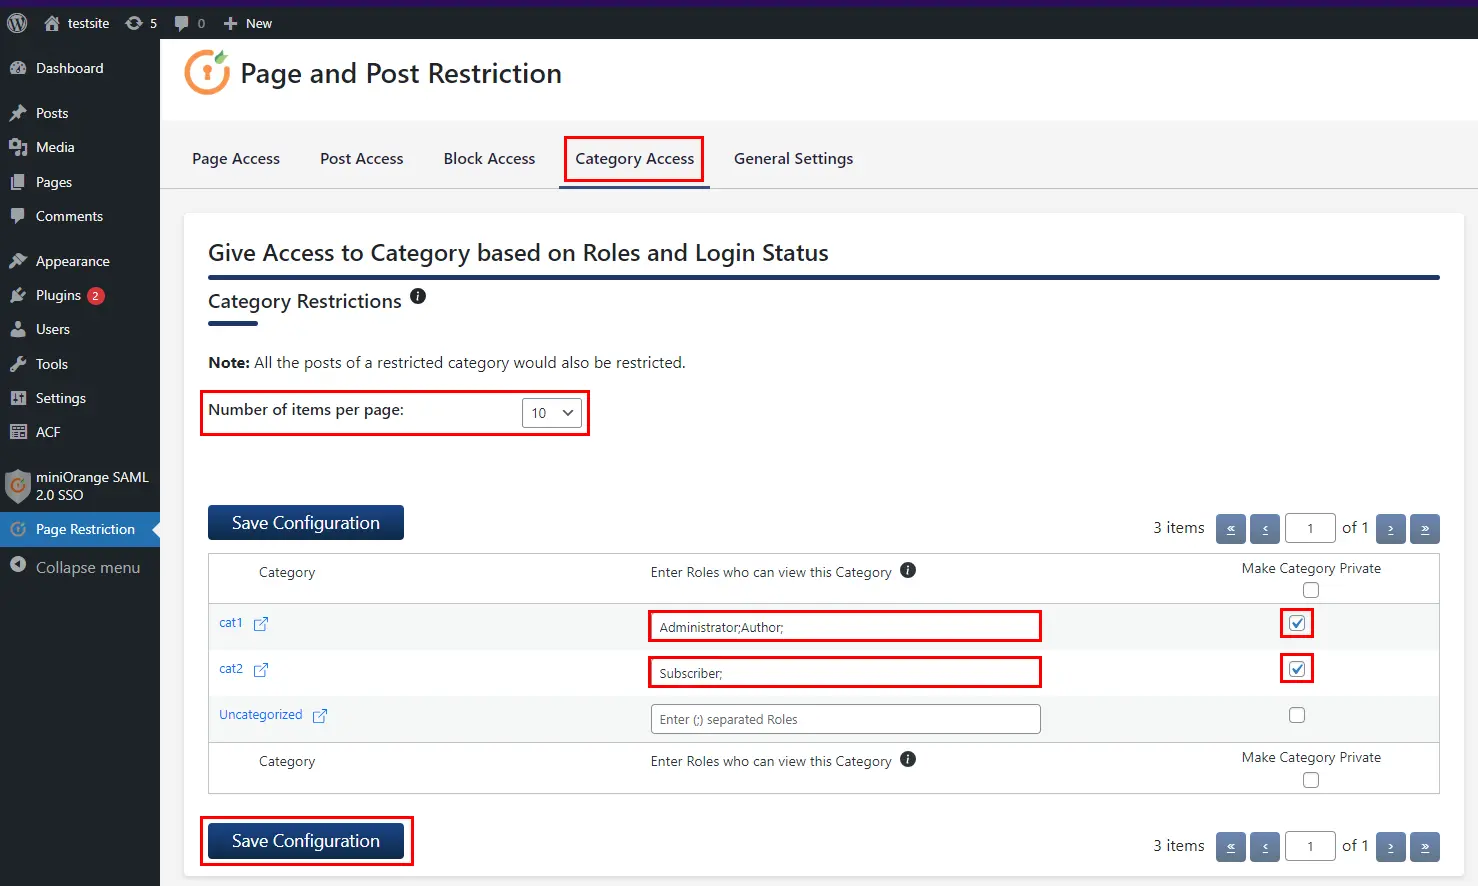 Page Restriction WordPress (WP) | Redirect to Single Ign-On | Block Access